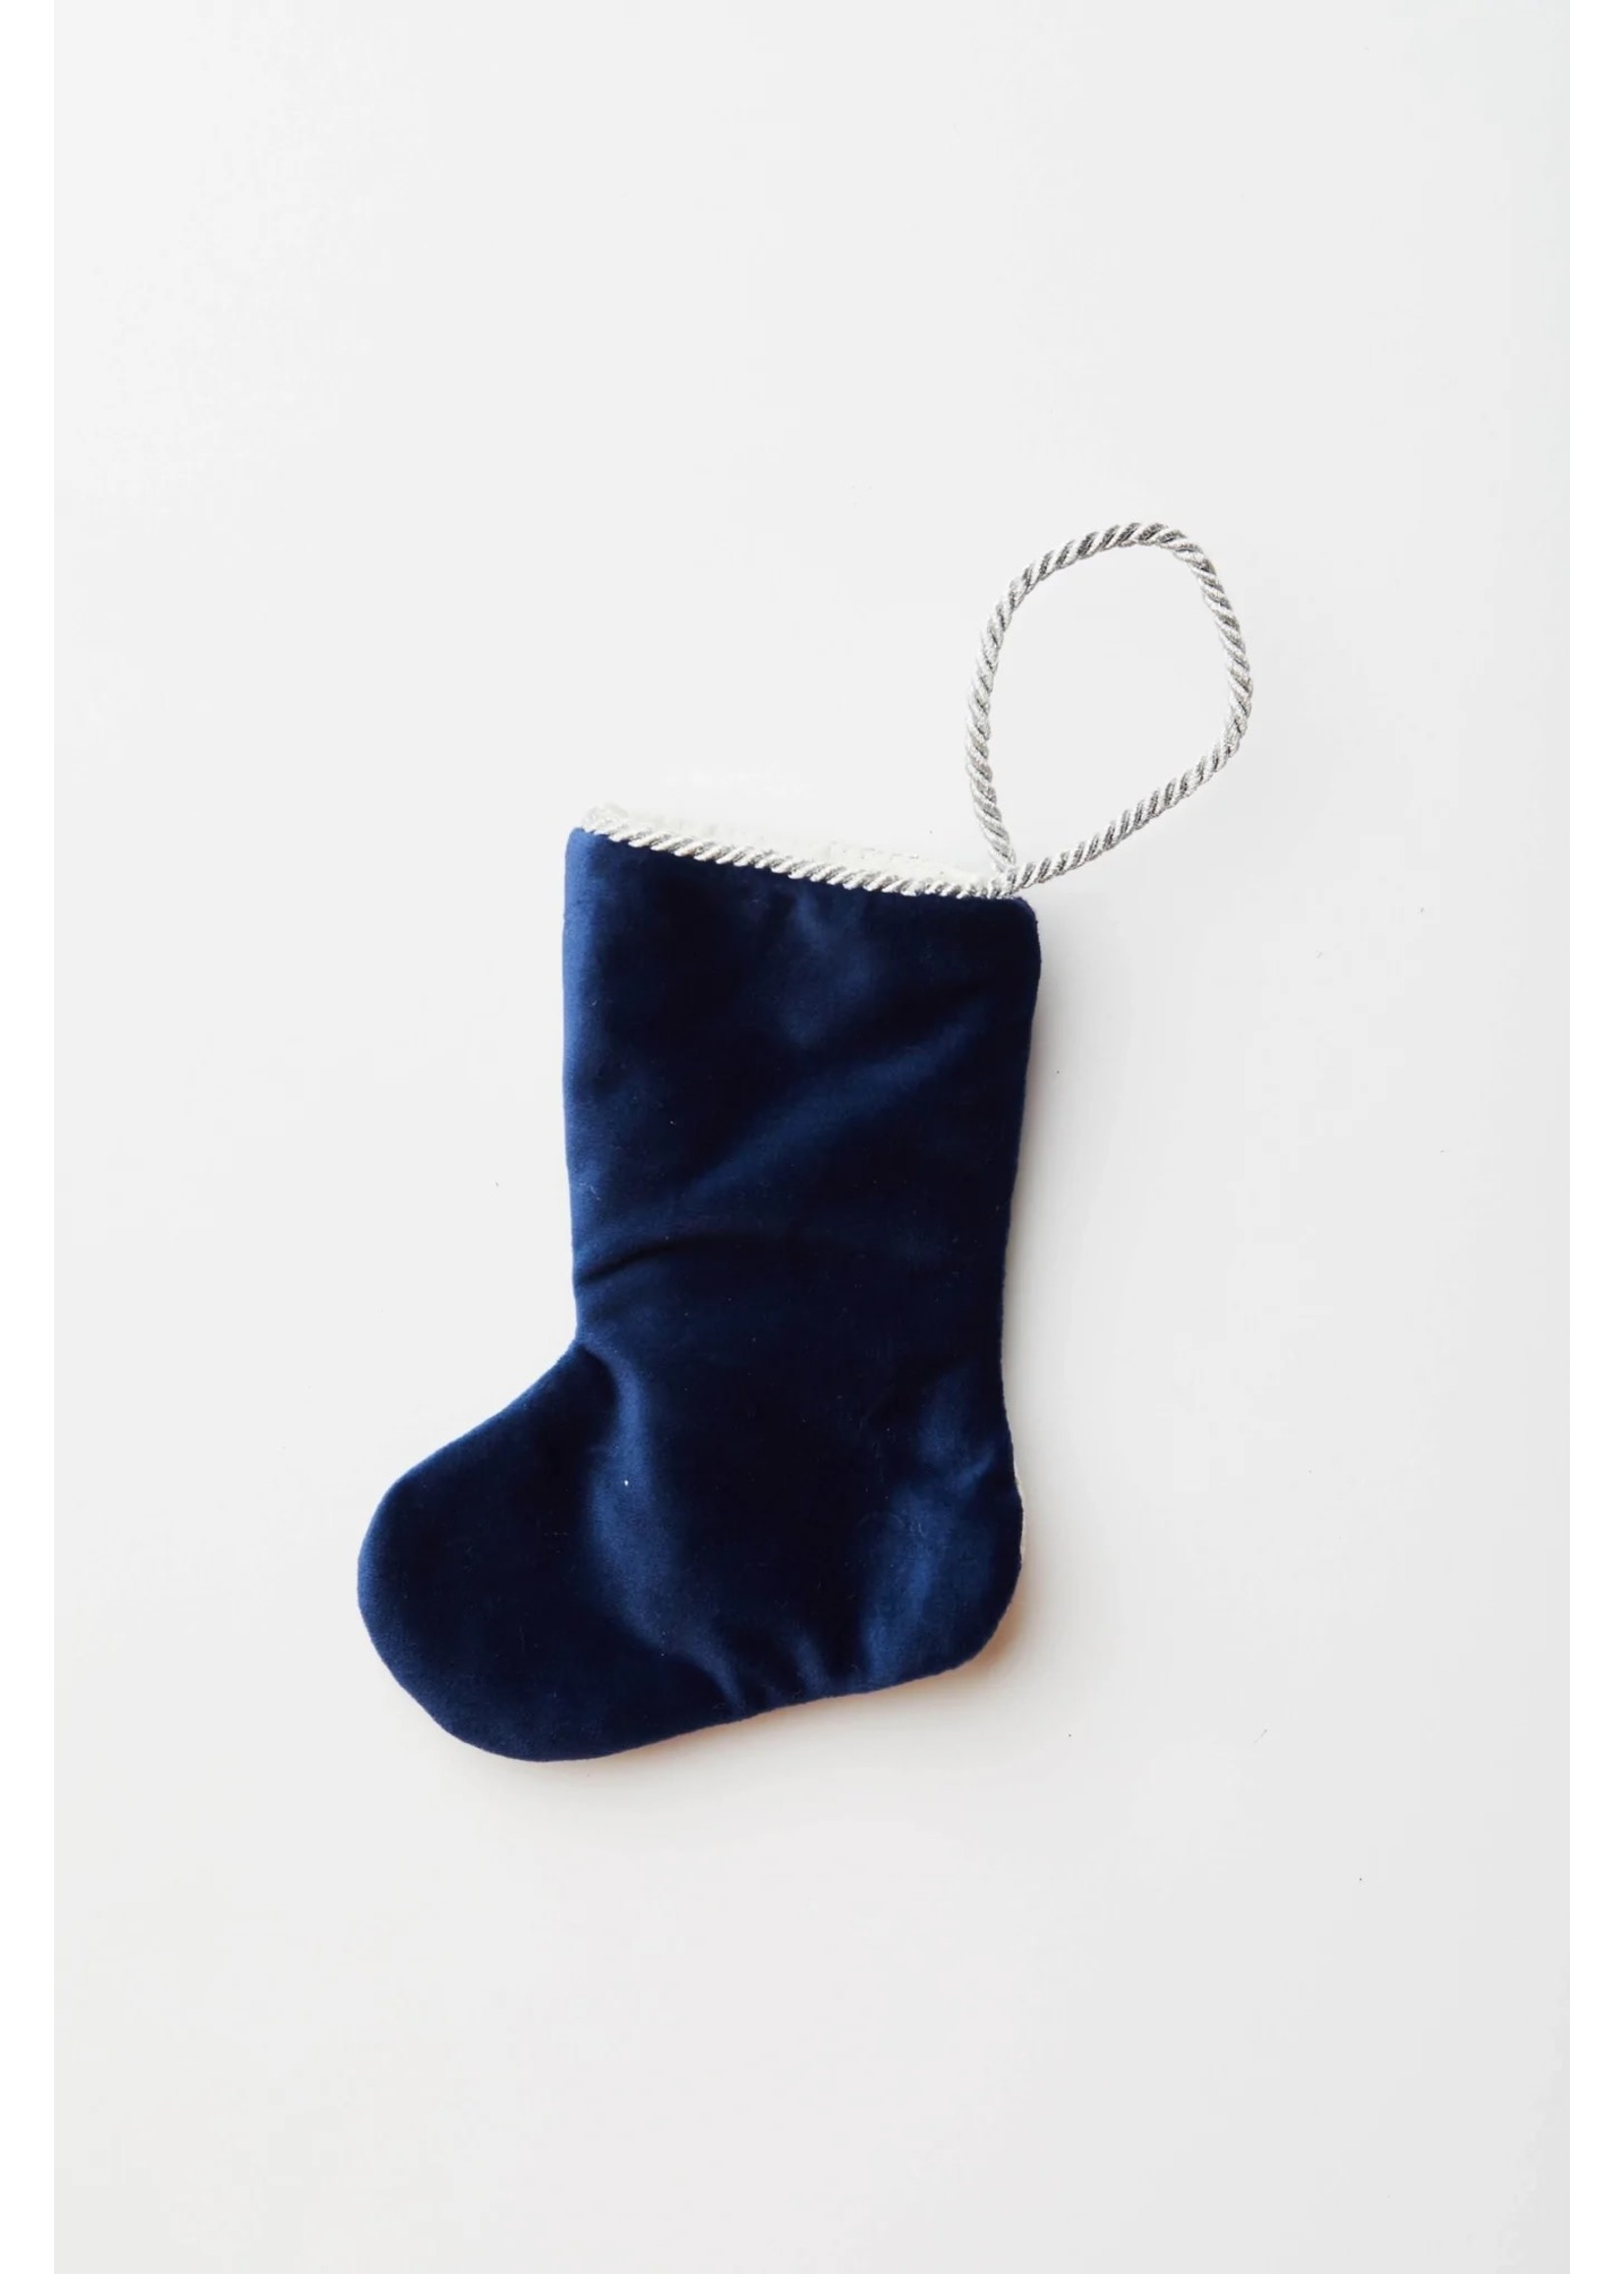 Bauble Stockings Bauble Stocking - Jingle Bells